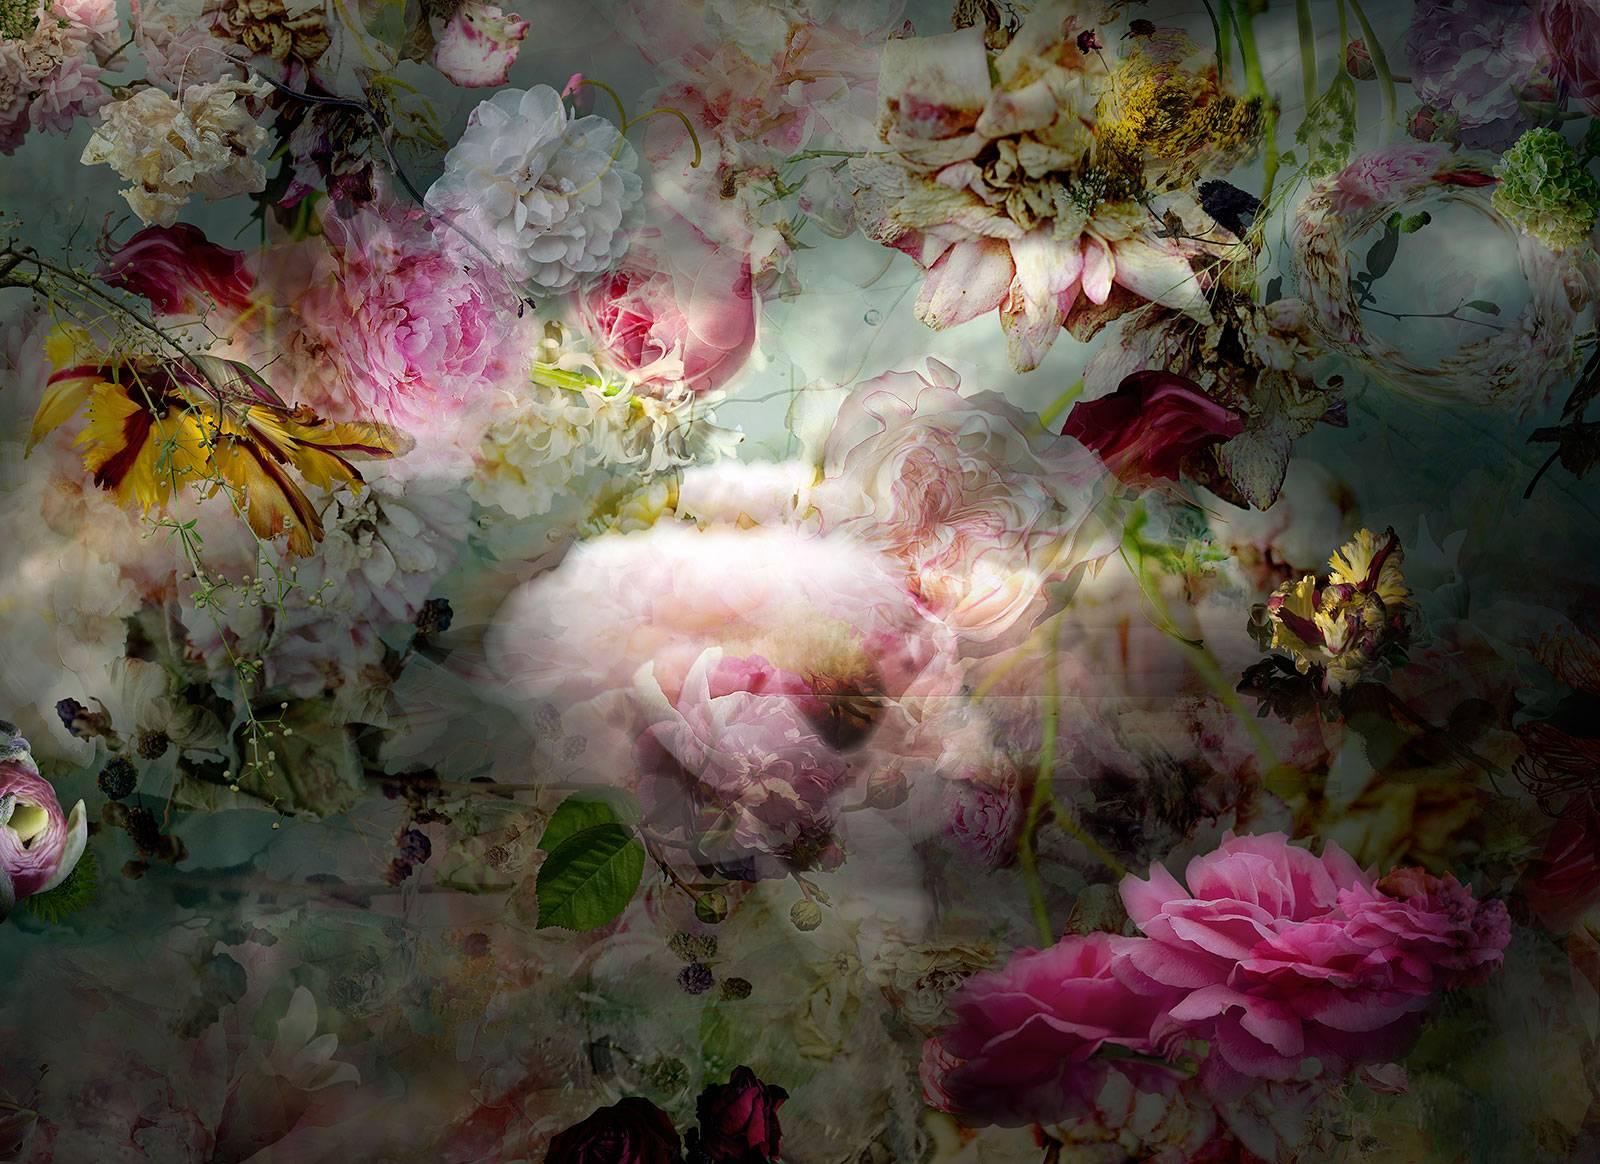 Isabelle Menin Still-Life Photograph - Solstice #8 - Floral still life abstract landscape contemporary photograph